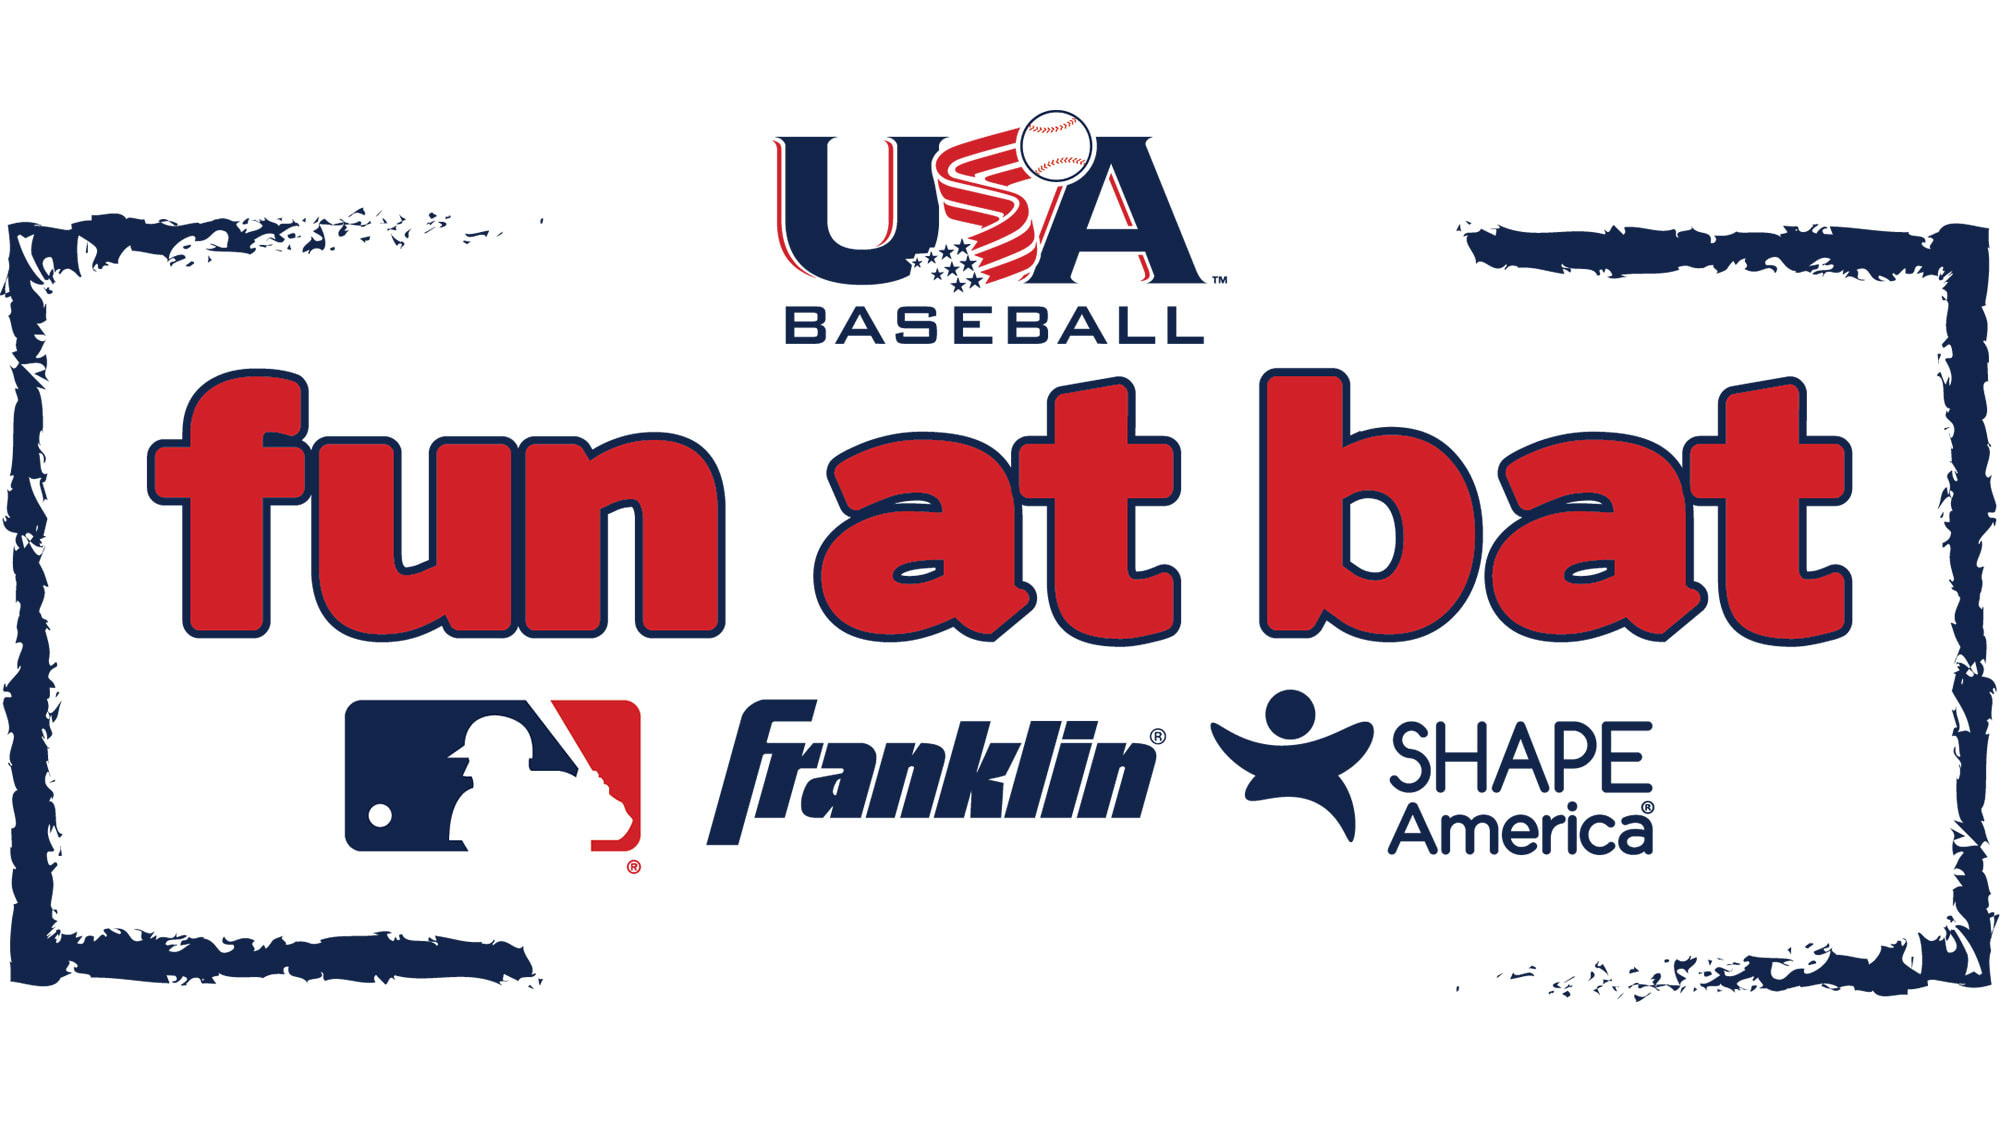 USA Baseball and Major League Baseball to Host Orlando Elementary Students for Special Youth Event During Baseballs Winter Meetings USA Baseball picture